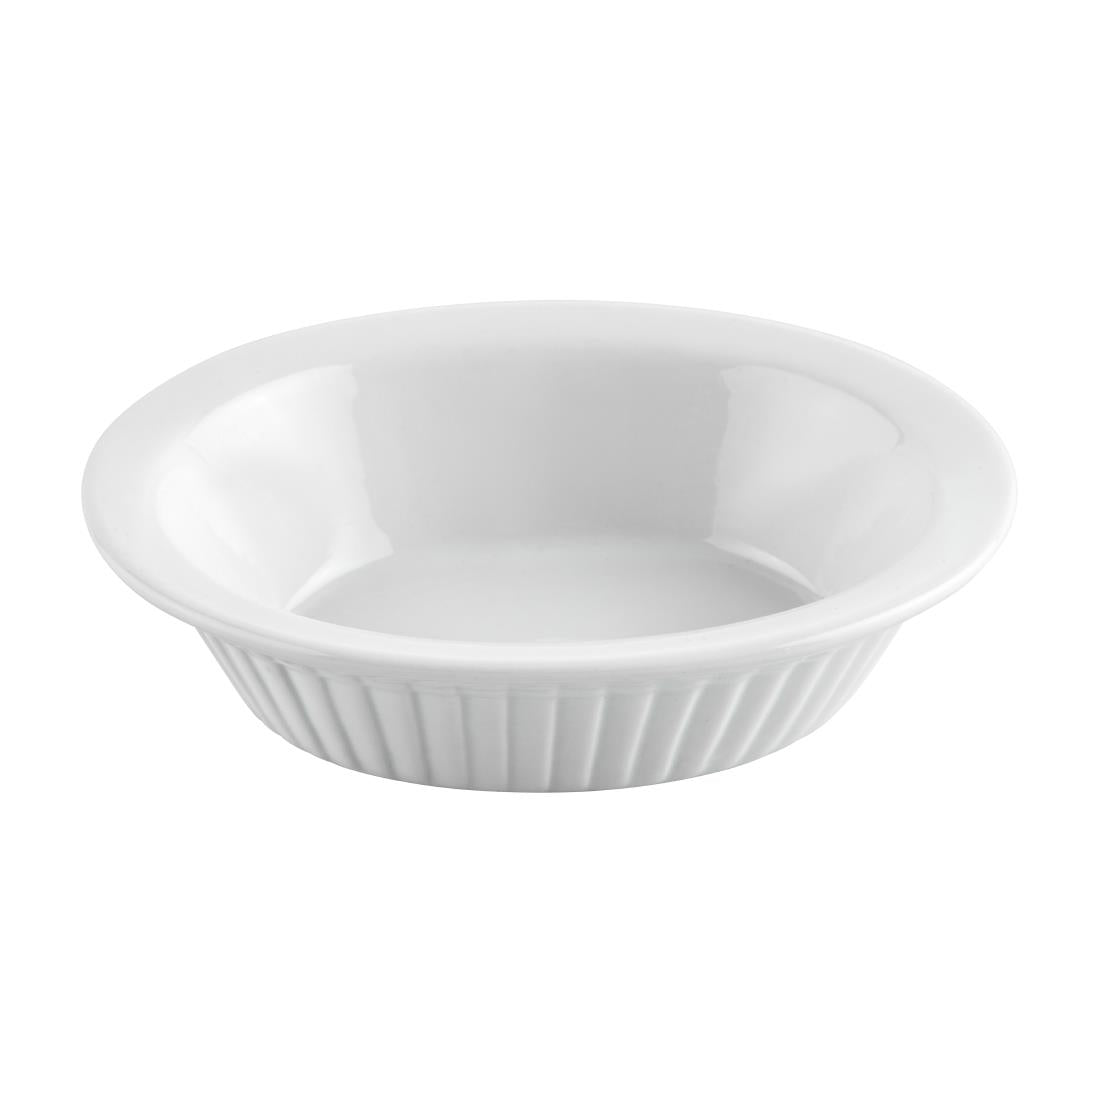 C110 Olympia Whiteware Oval Pie Dishes 170mm (Pack of 6)